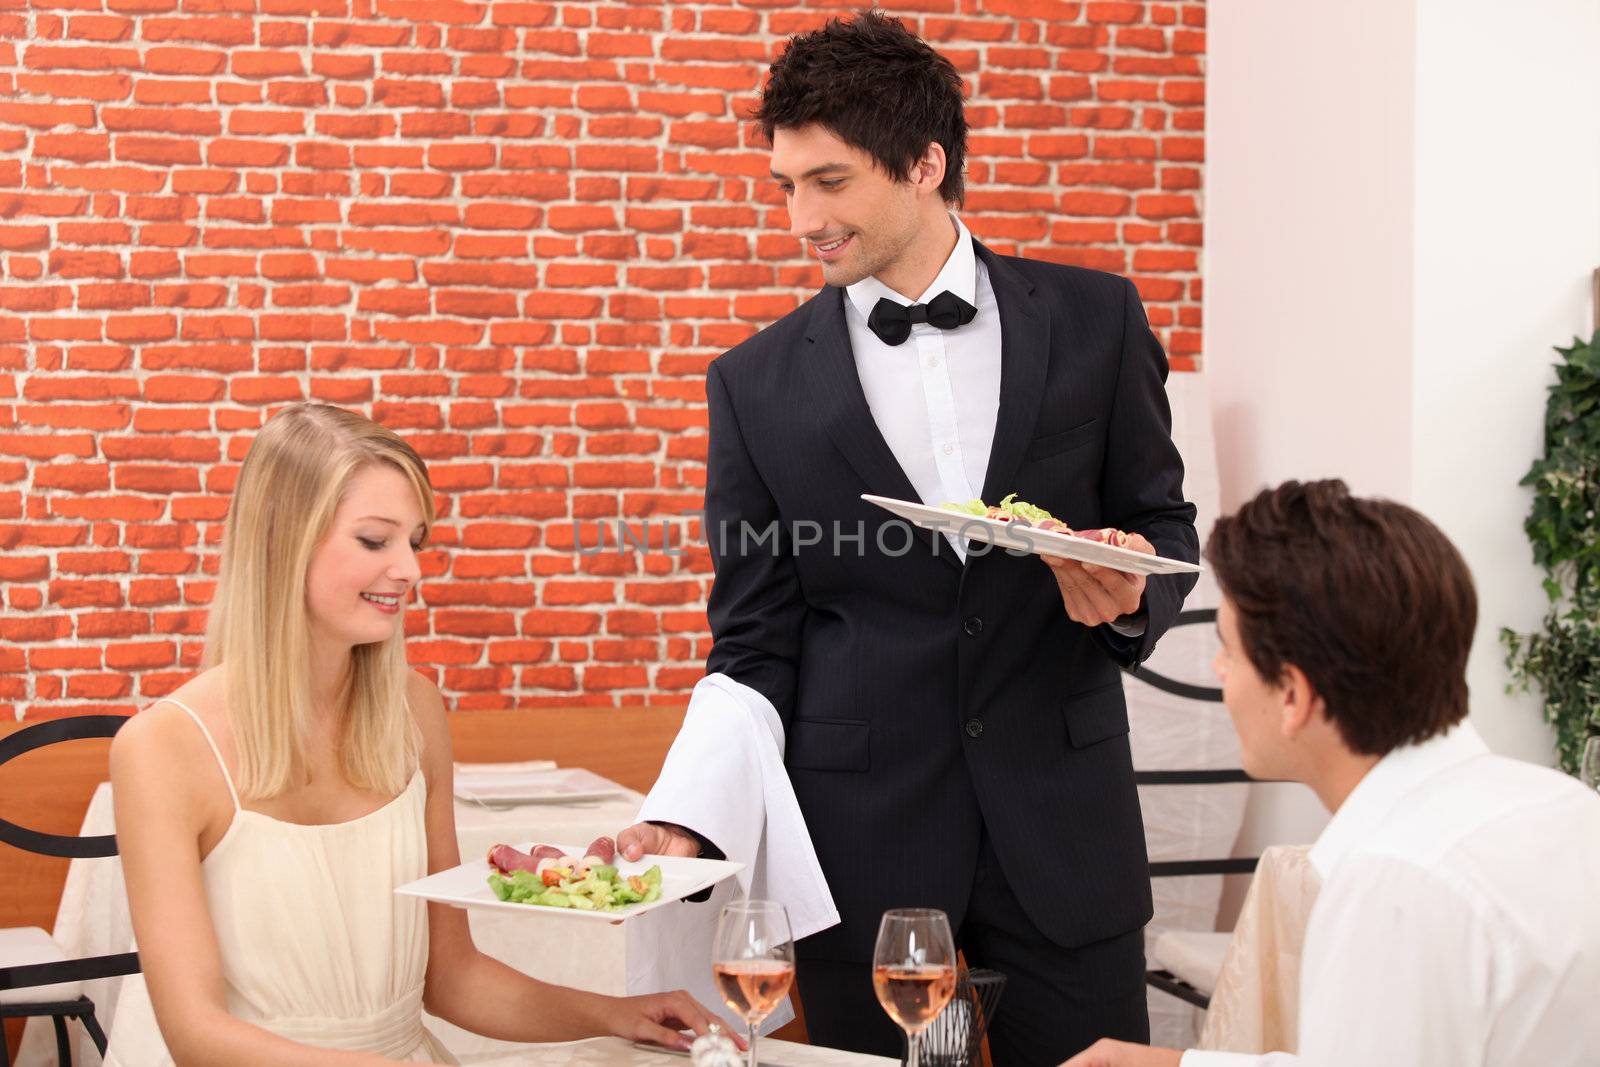 Waiter serving plate of food by phovoir